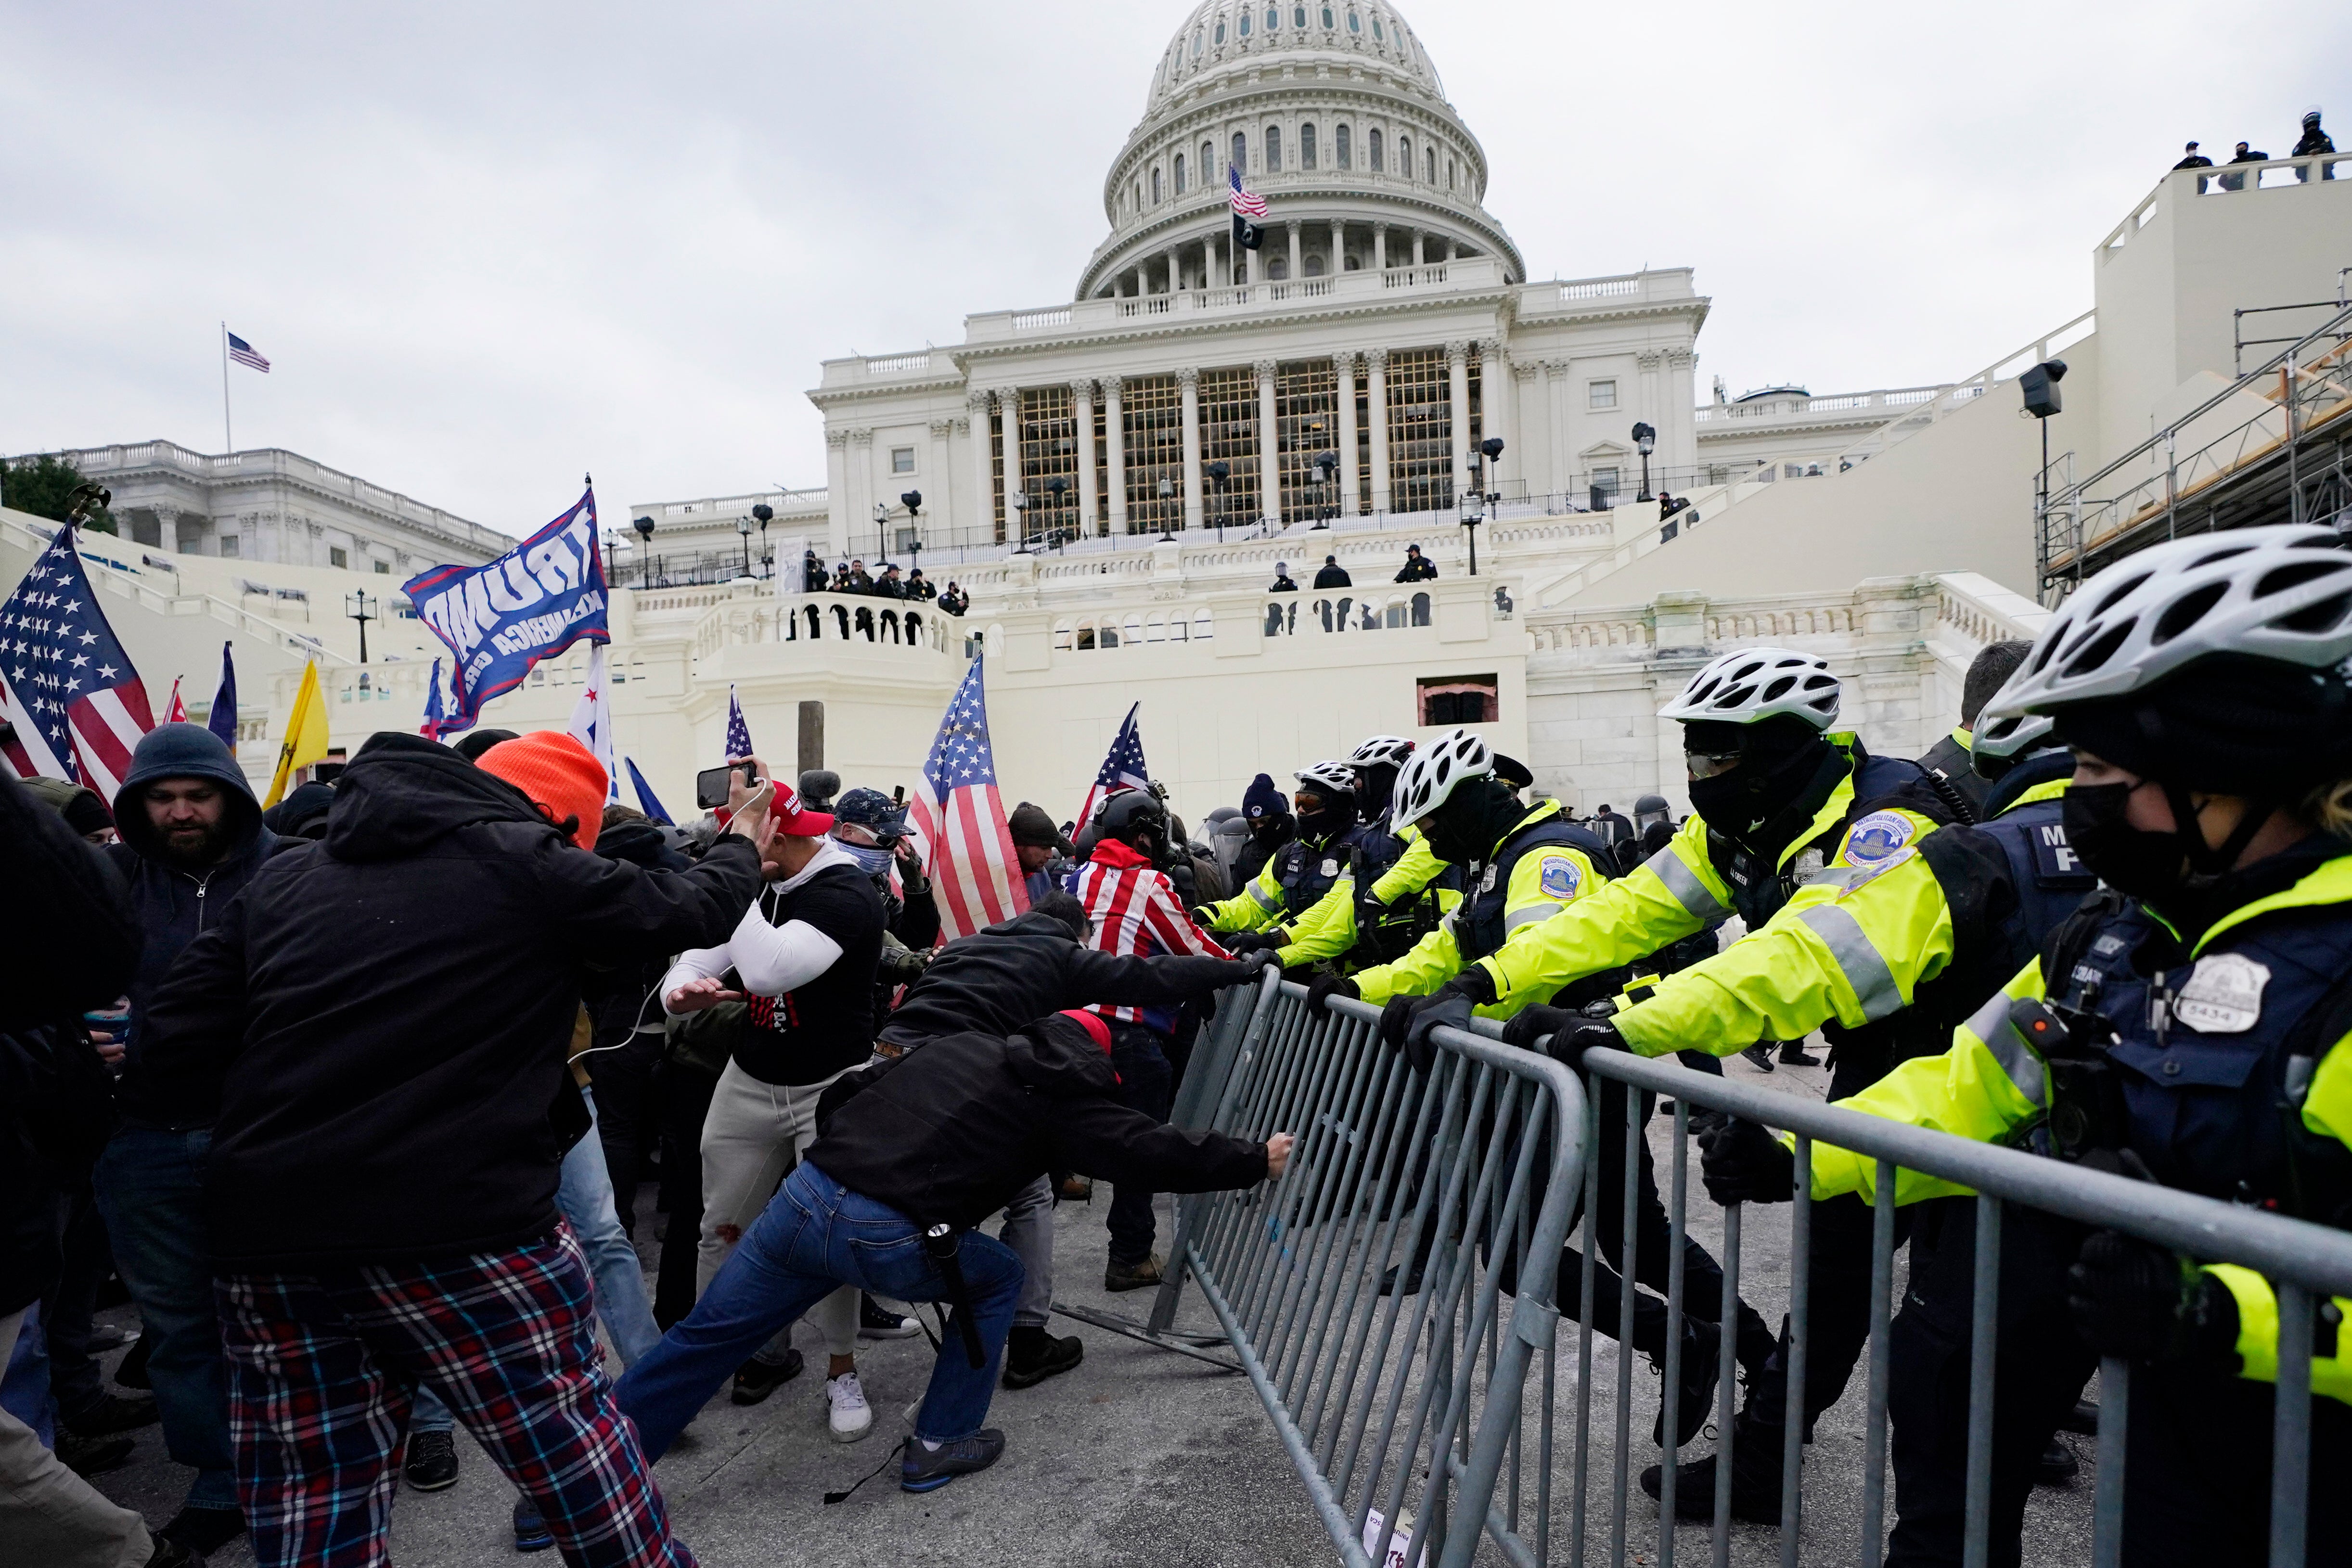 A mob of Donald Trump’s supporters pushed through police barricades to break into the US Capitol on 6 January 2021, disruping the certification of 2020 election results